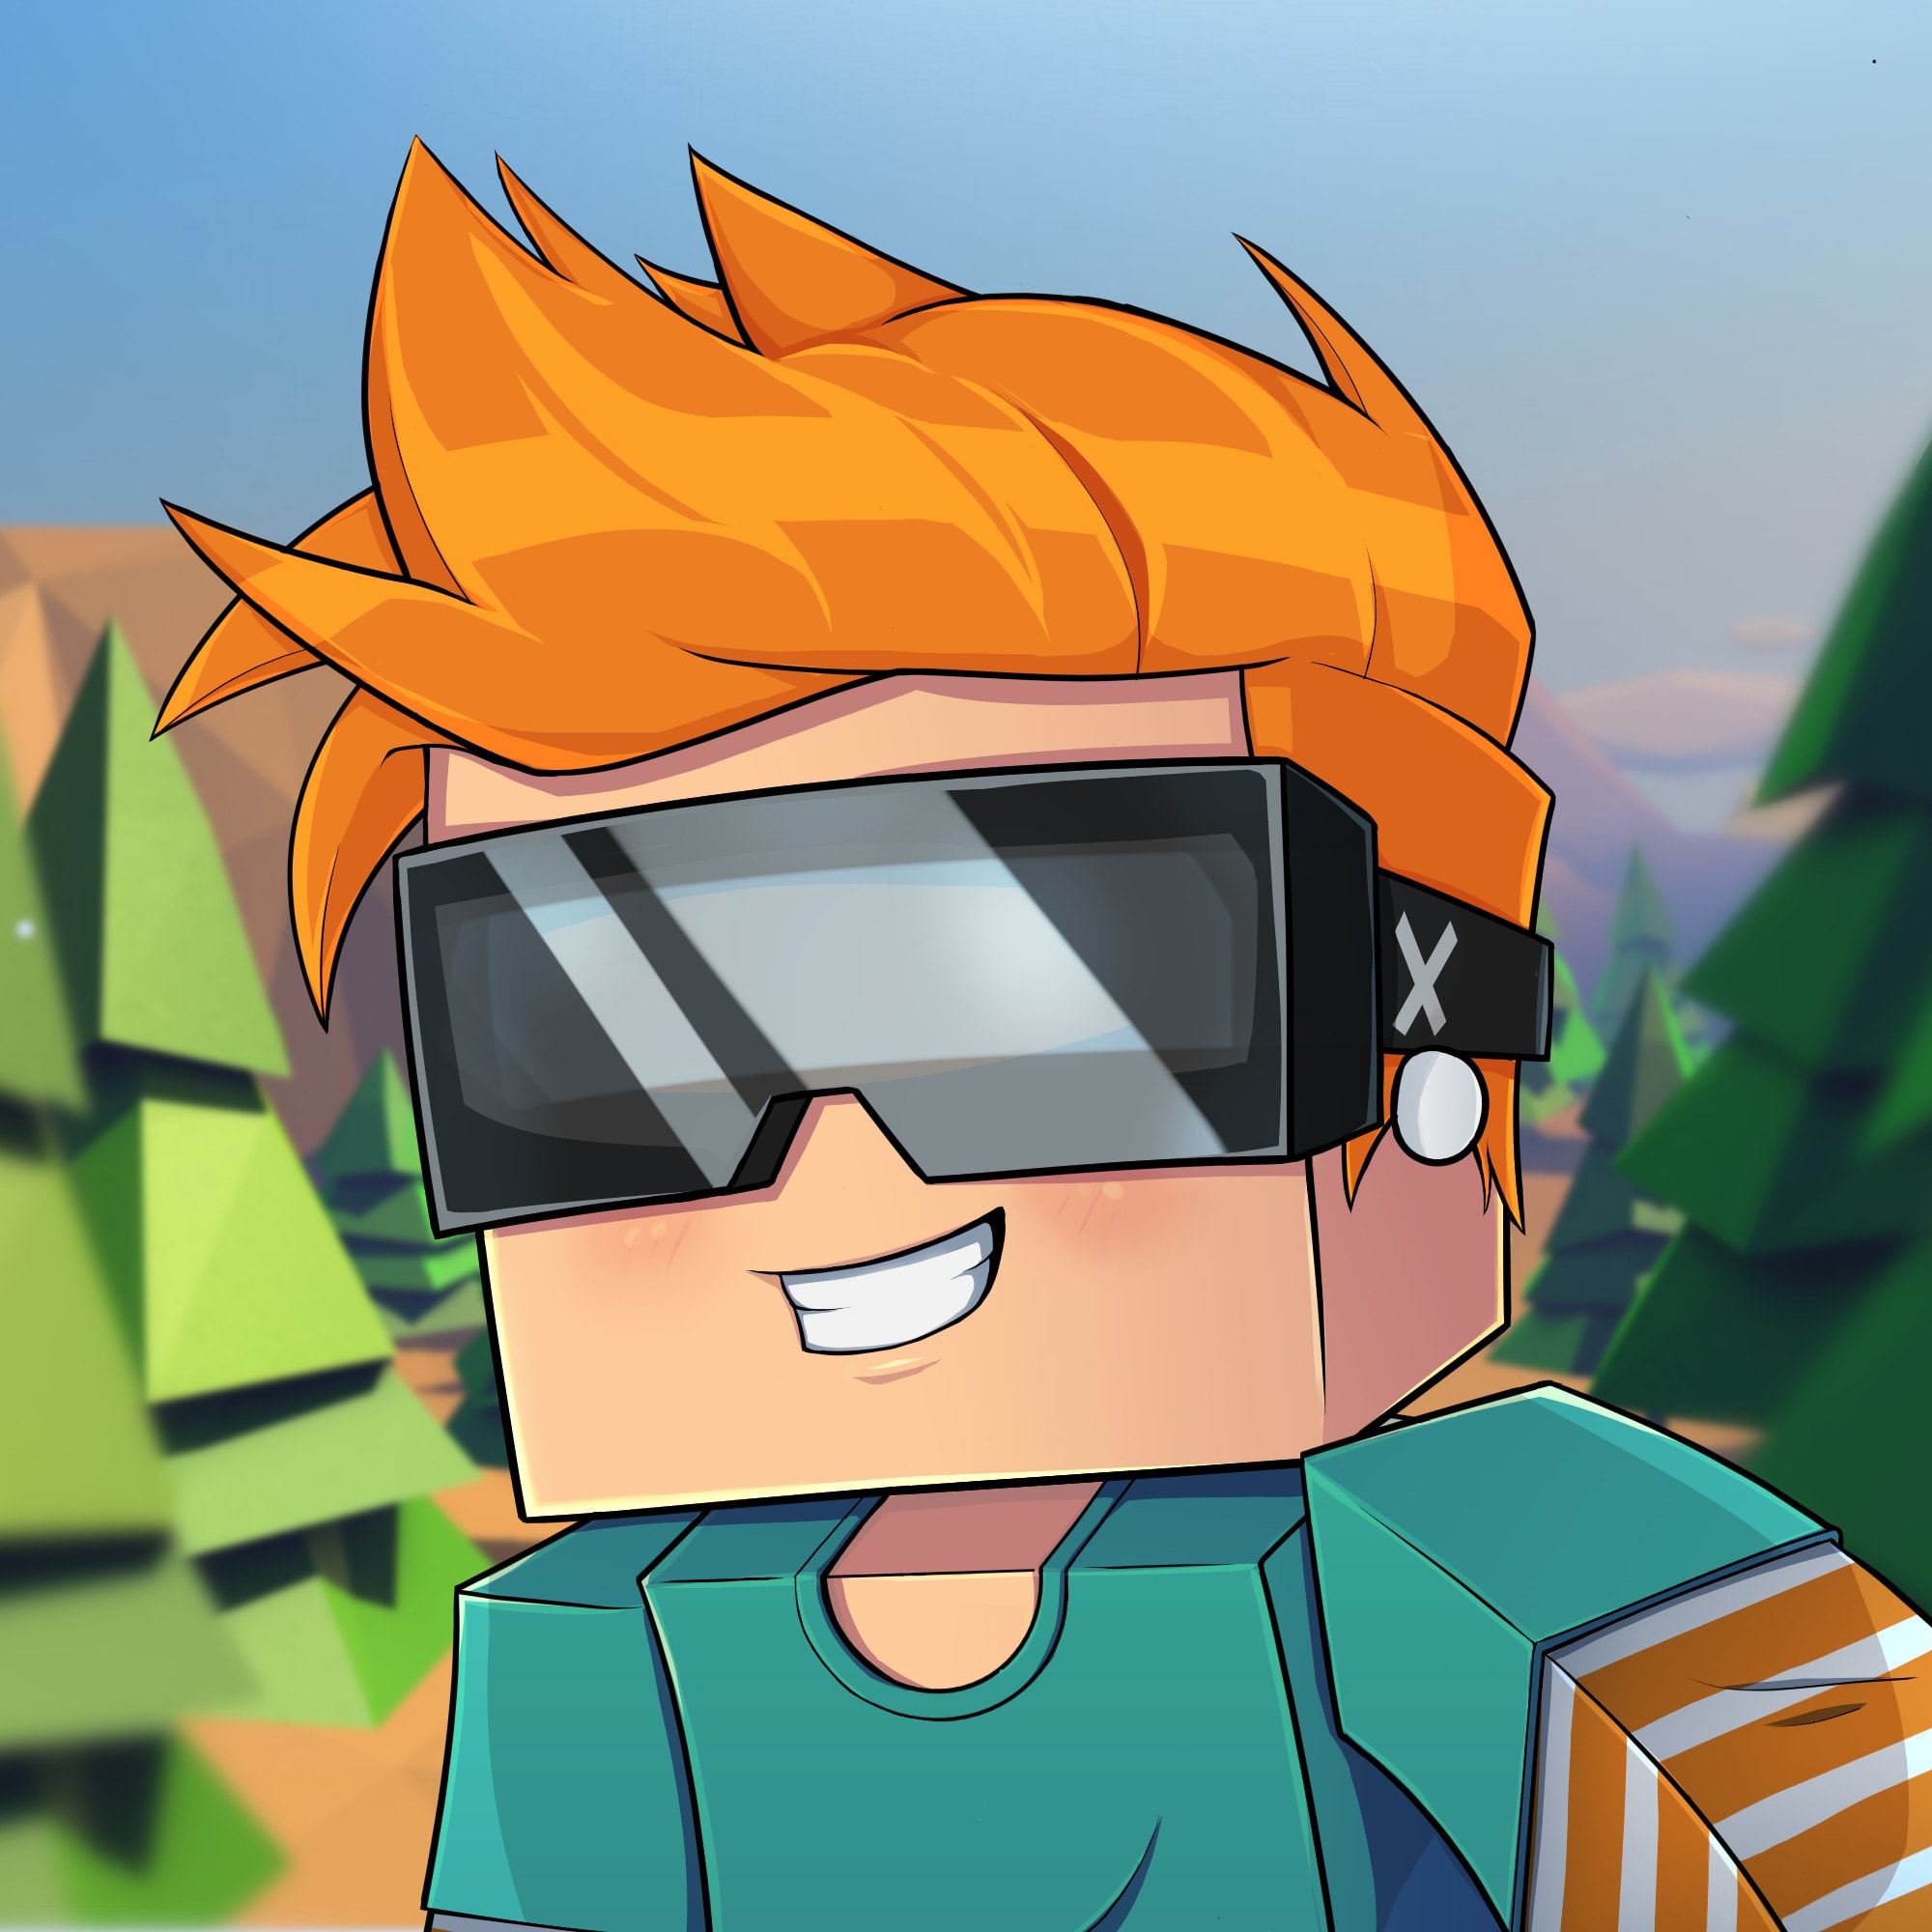 Draw Your Minecraft Or Roblox Character For A Cheap Price By Eeediejay - best roblox character for cheap